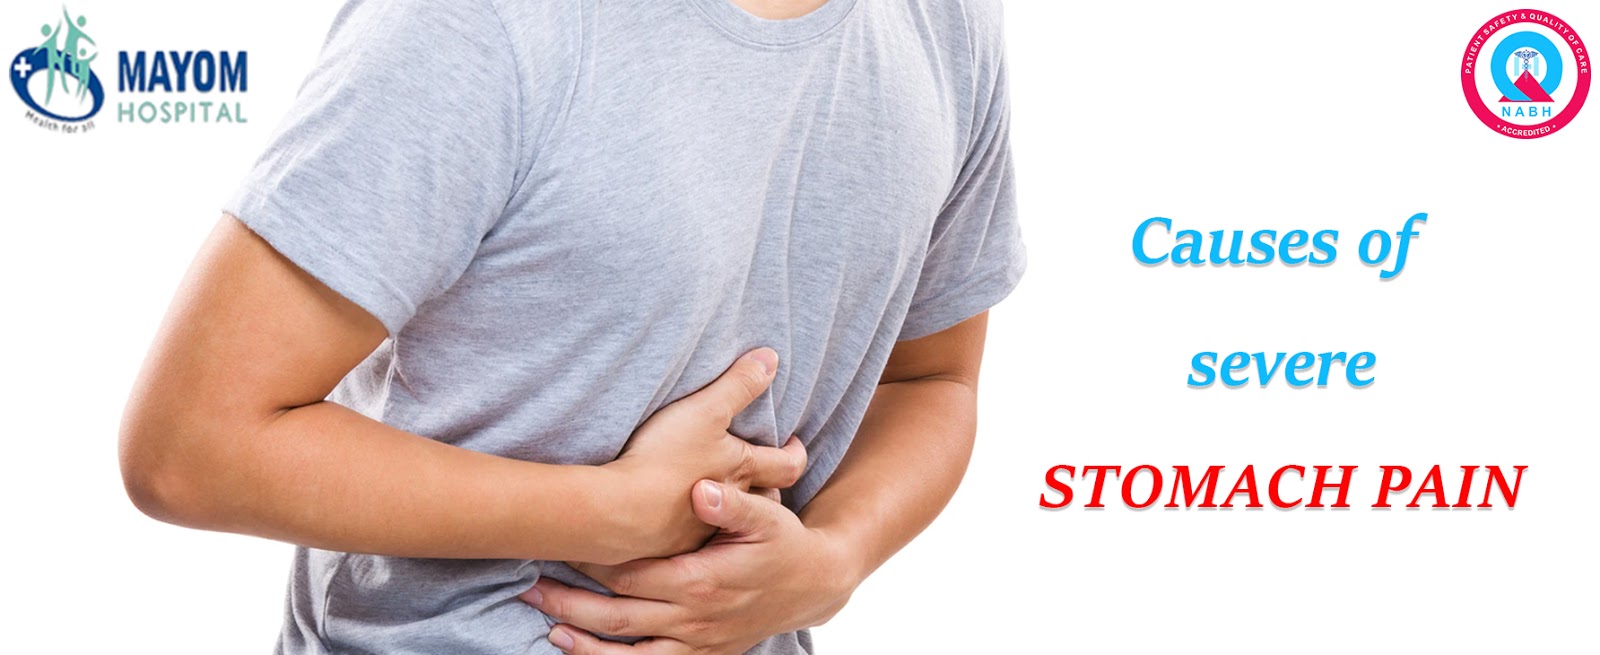 What Are The Causes of severe stomach pain?